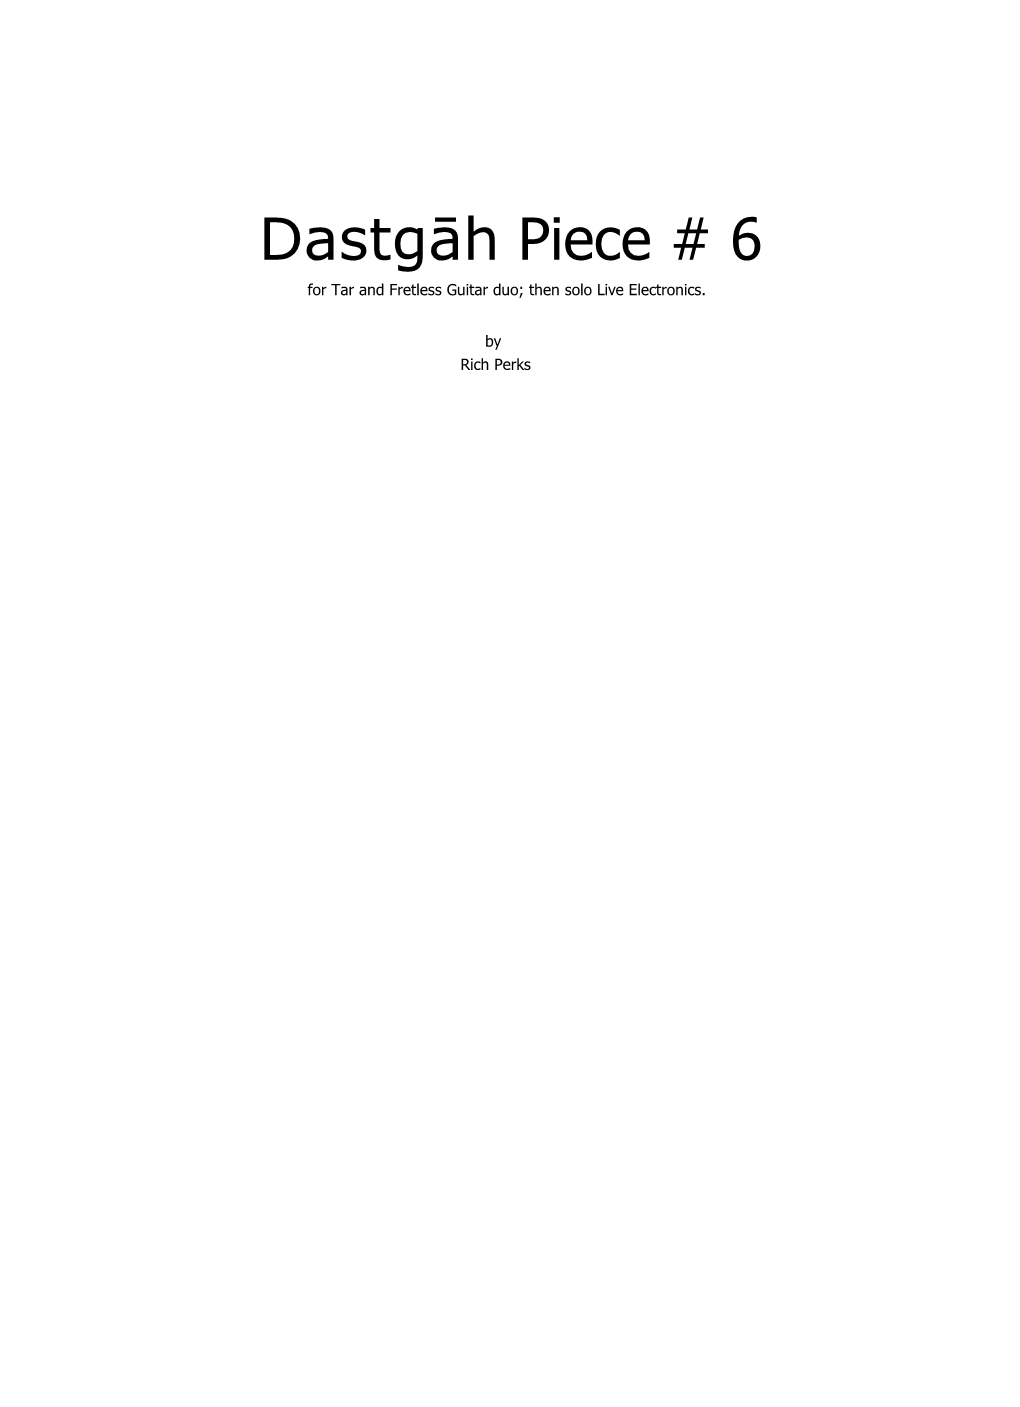 Dastgāh Piece # 6 for Tar and Fretless Guitar Duo; Then Solo Live Electronics